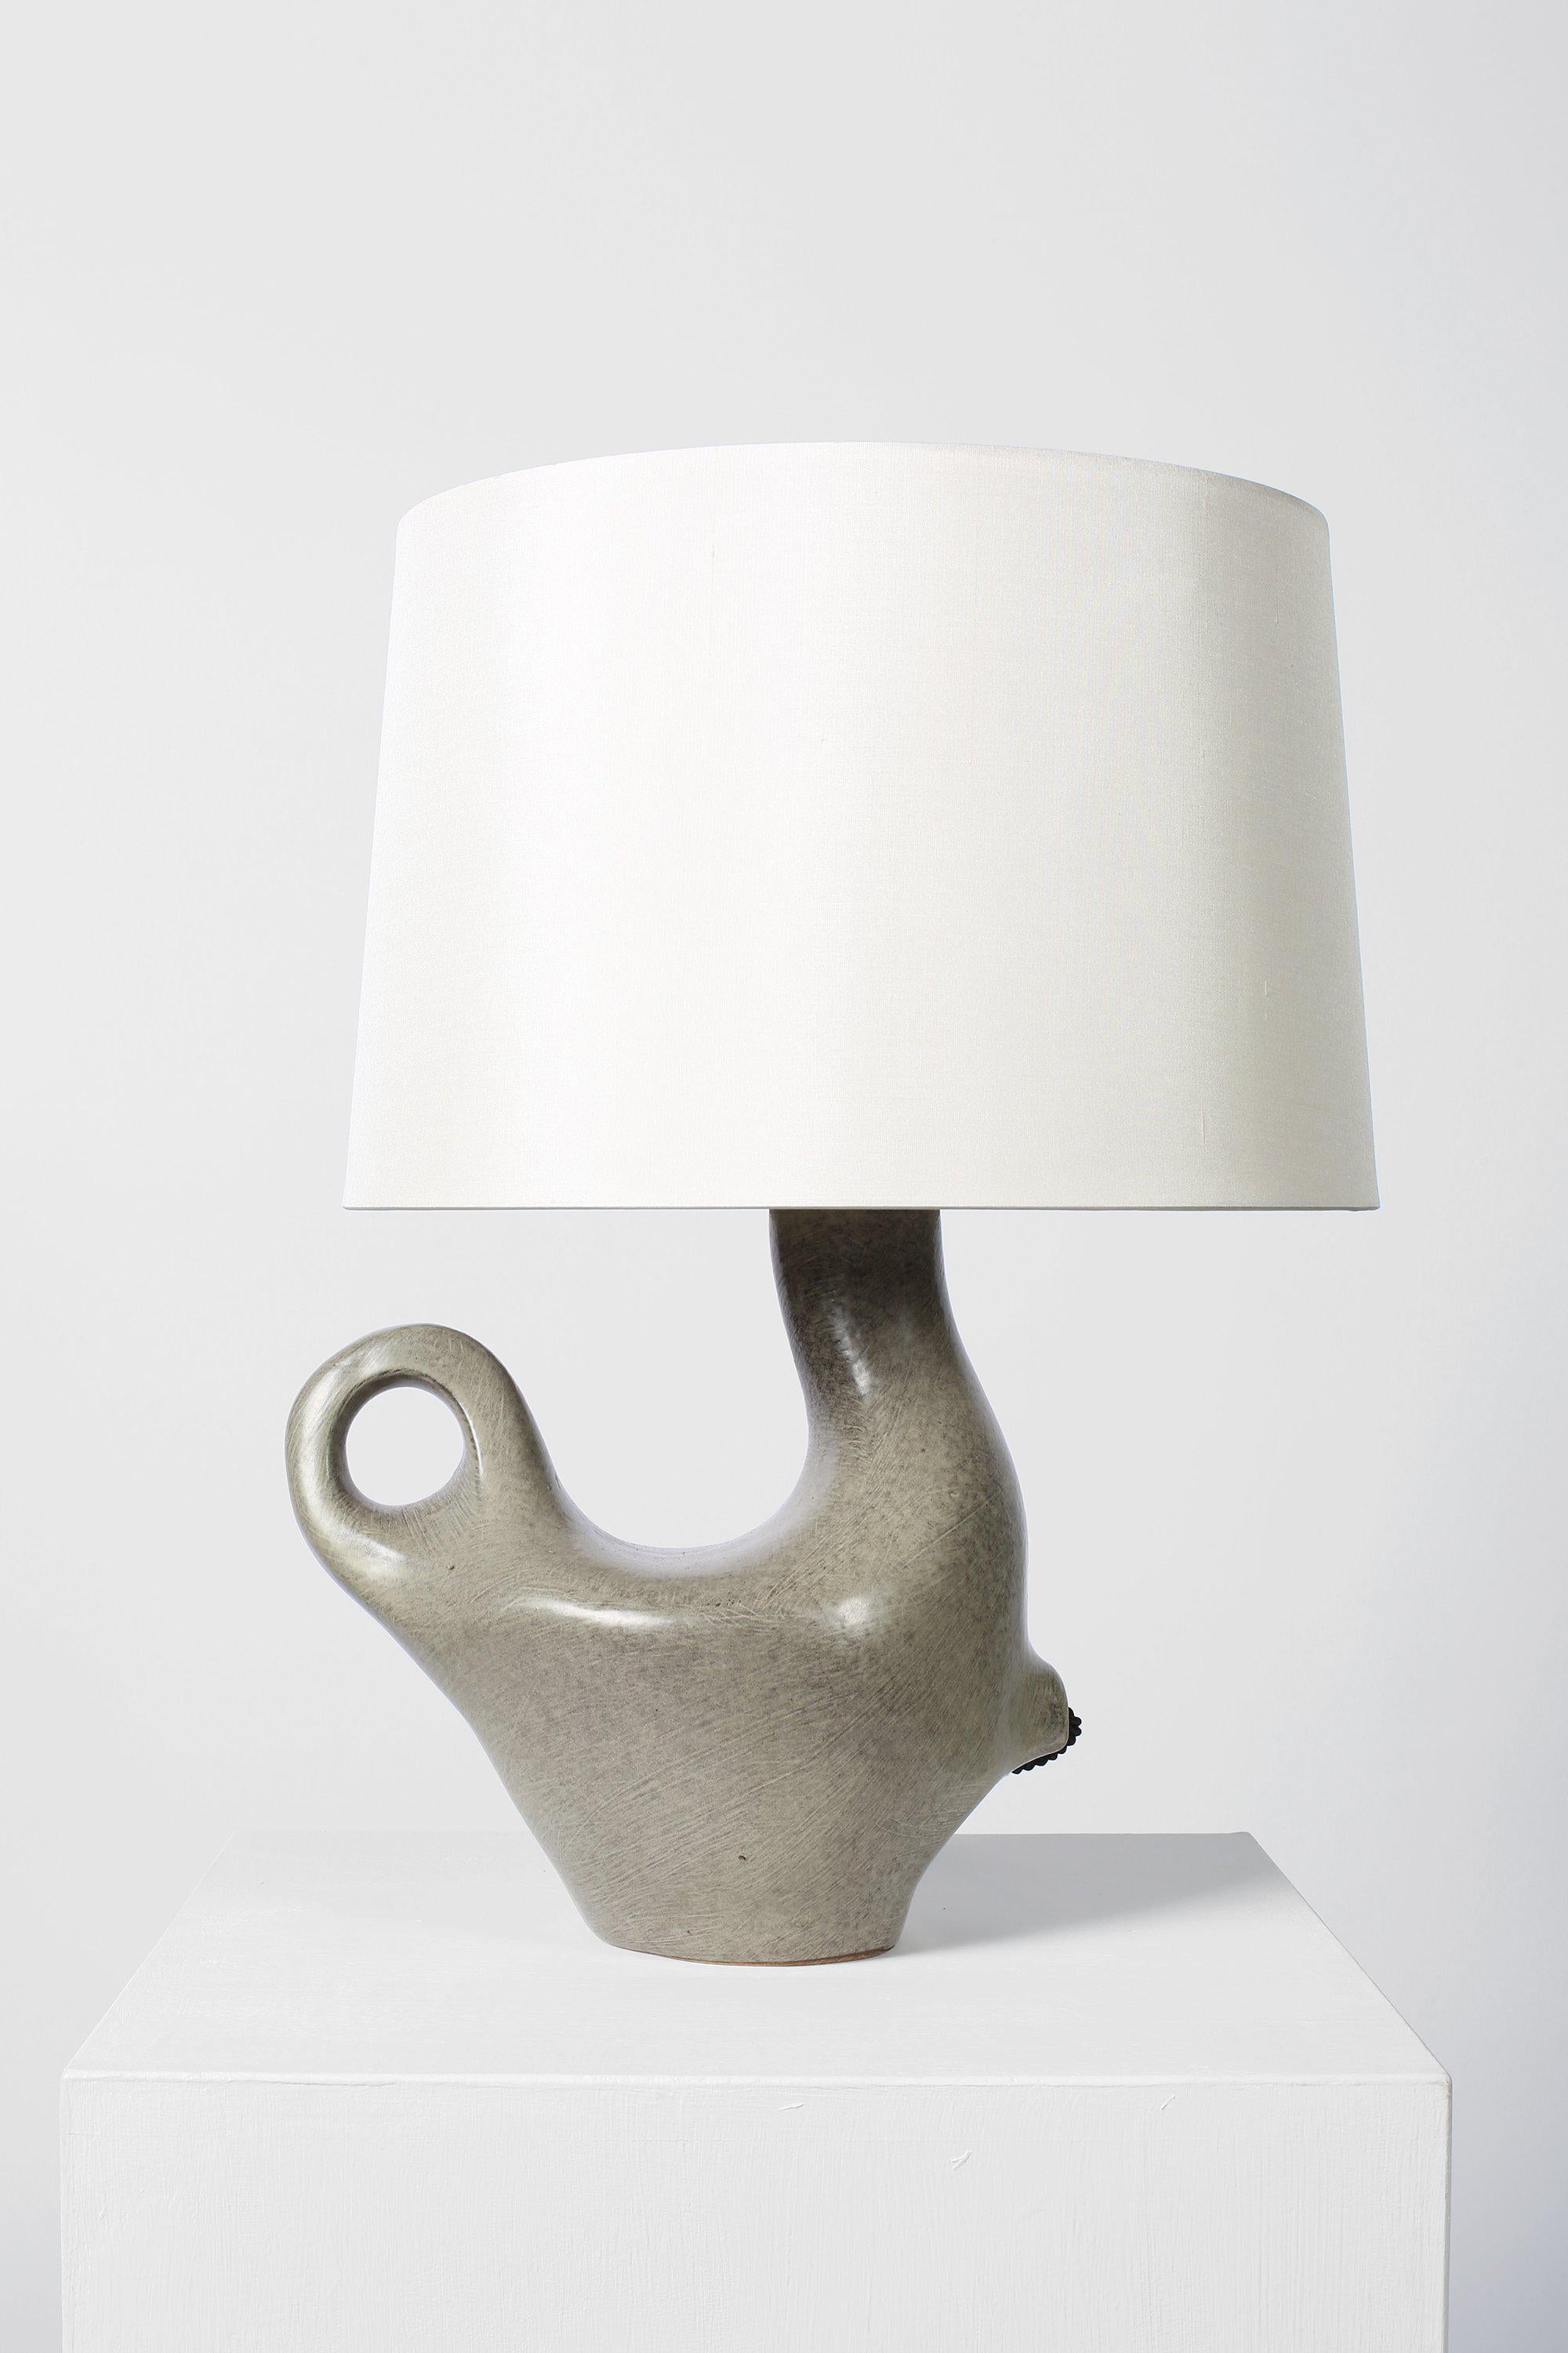 A mottled grey glazed ceramic table lamp of zoomorphic form by Max Idlas,
signed. 
France, 1960s.
Measures: 47 cm high by 35 cm diameter
---
Max Idlas was born in Marseilles, France in 1932 and moved to Paris in the 1950s to live in the